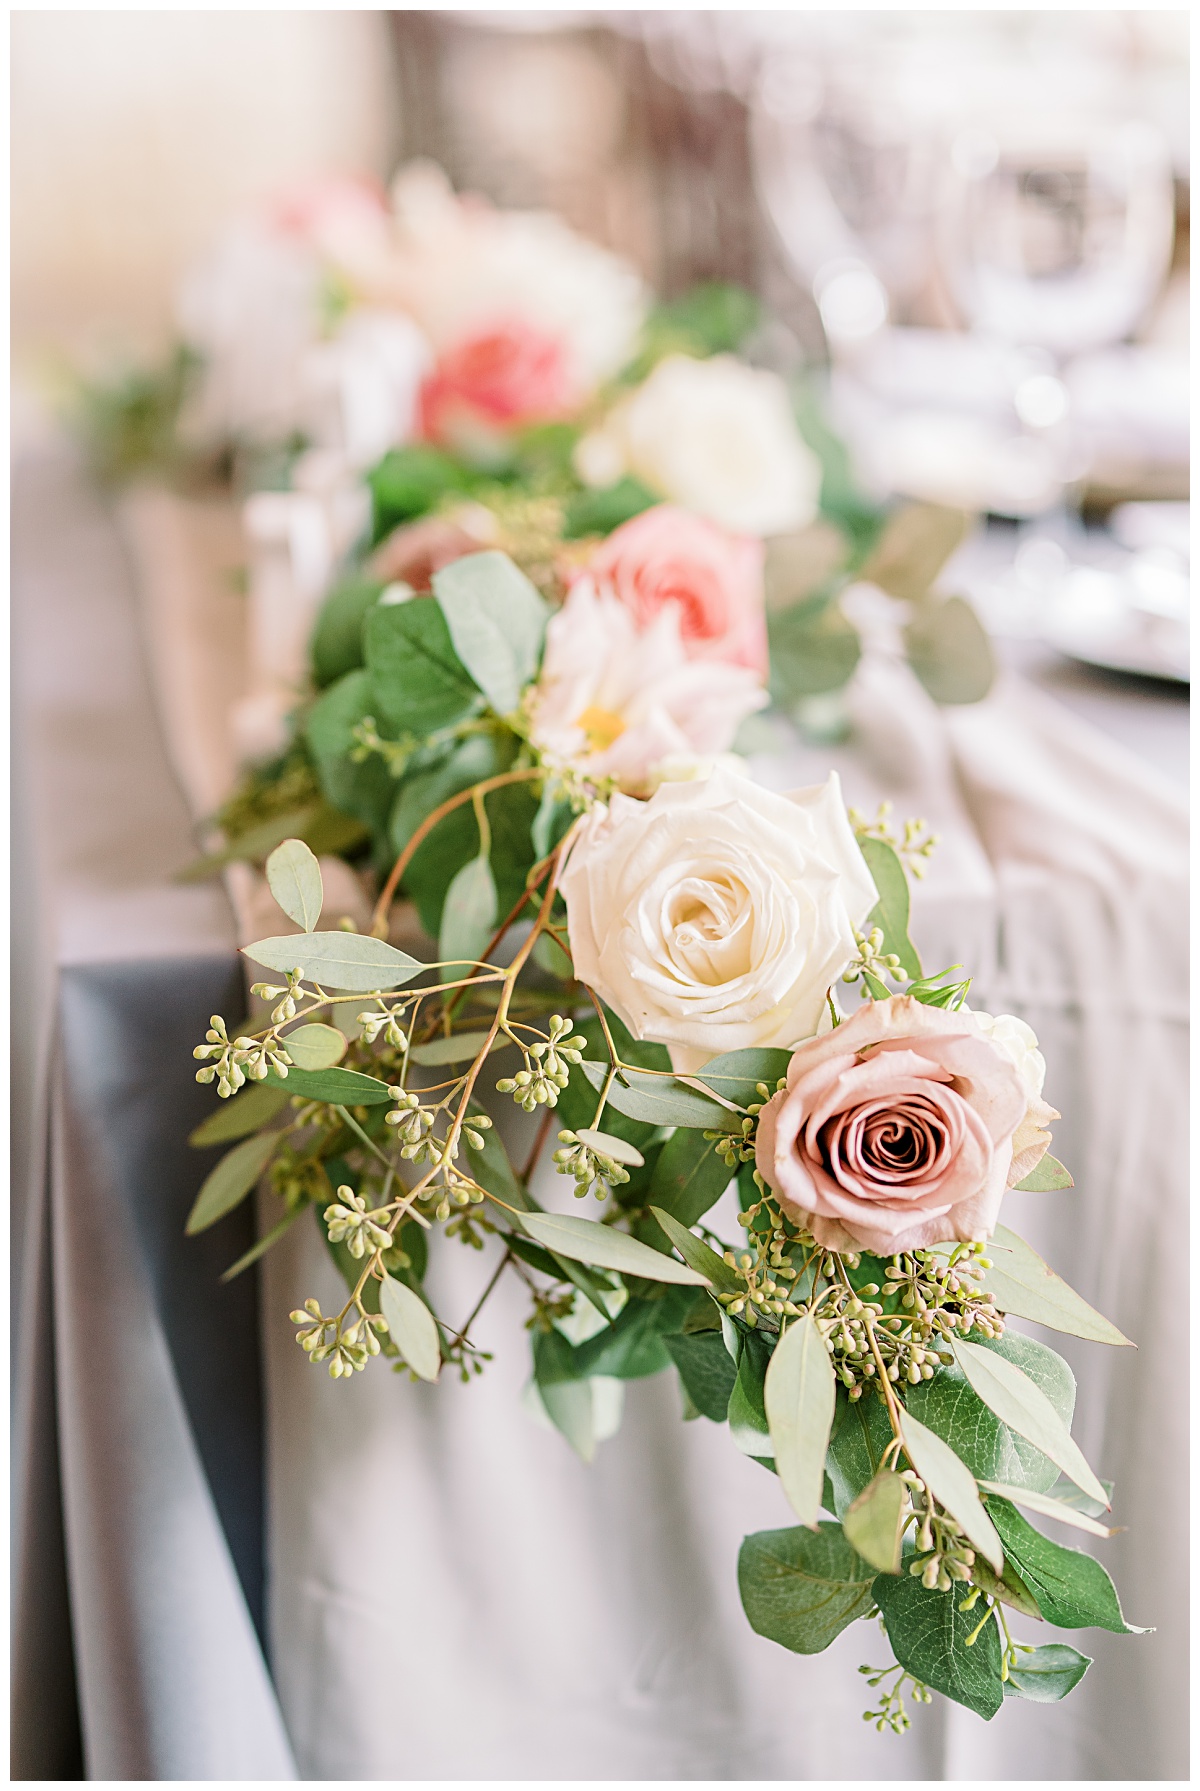 Seeded Eucalyptus foliage and roses from Wild and Lush style shoot | Alicia Yarrish Photography  